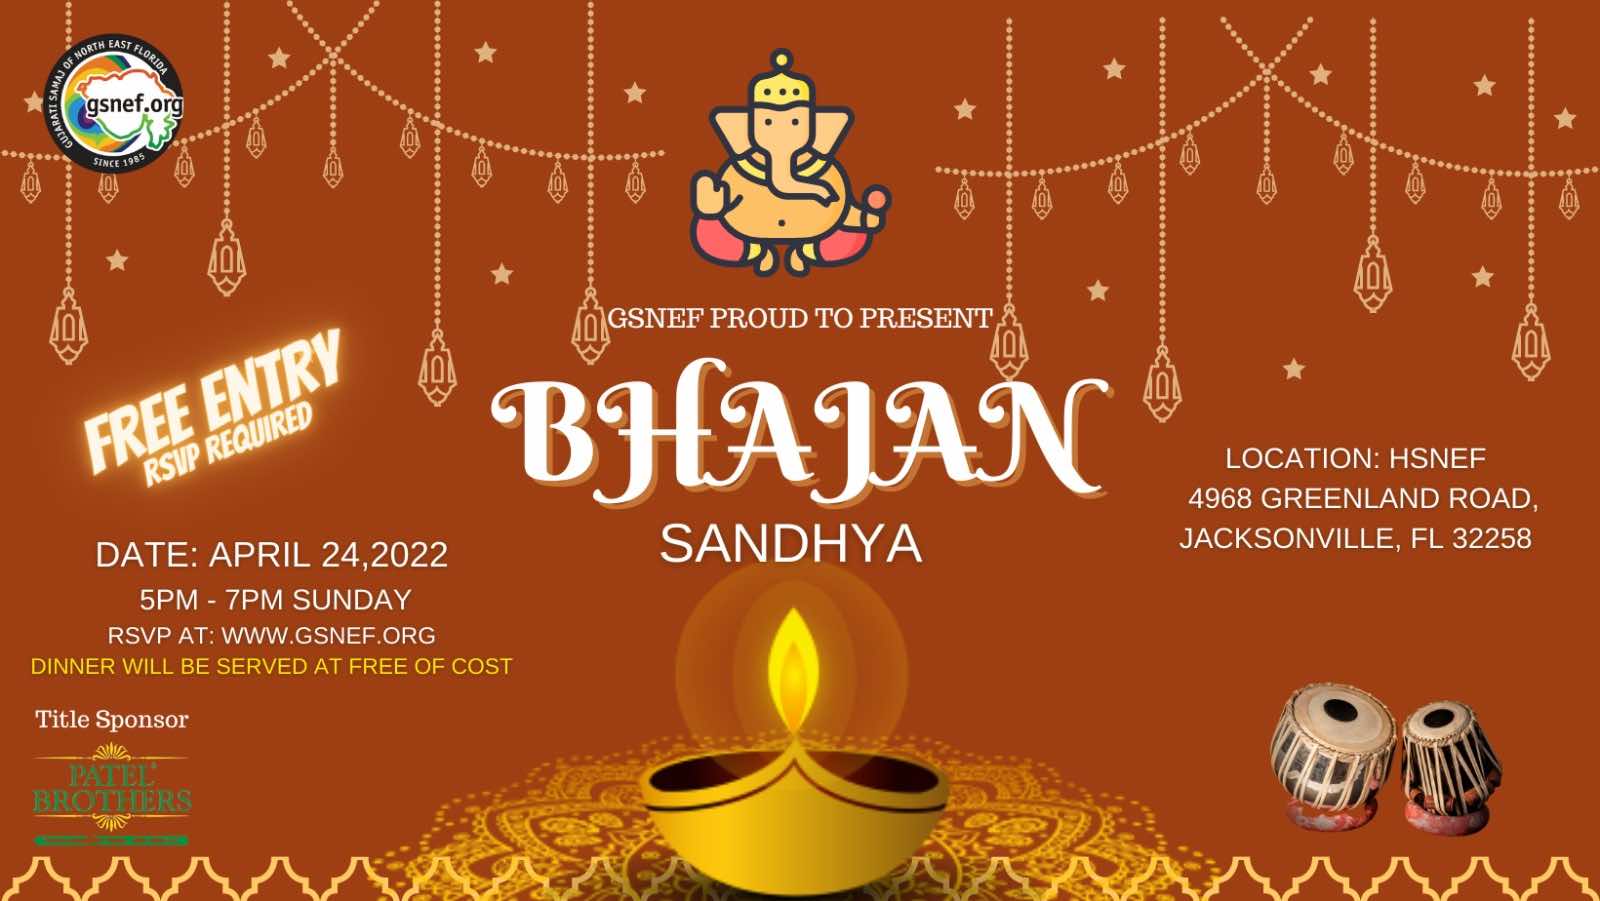 GSNEF PROUD TO PRESENT BHATAN SANDHYA DATE: APRIL 24,2022 5PM - 7PM SUNDAY RSVP AT: WWW.GSNEF.ORG DINNER WILL BE SERVED AT FREE OF COST